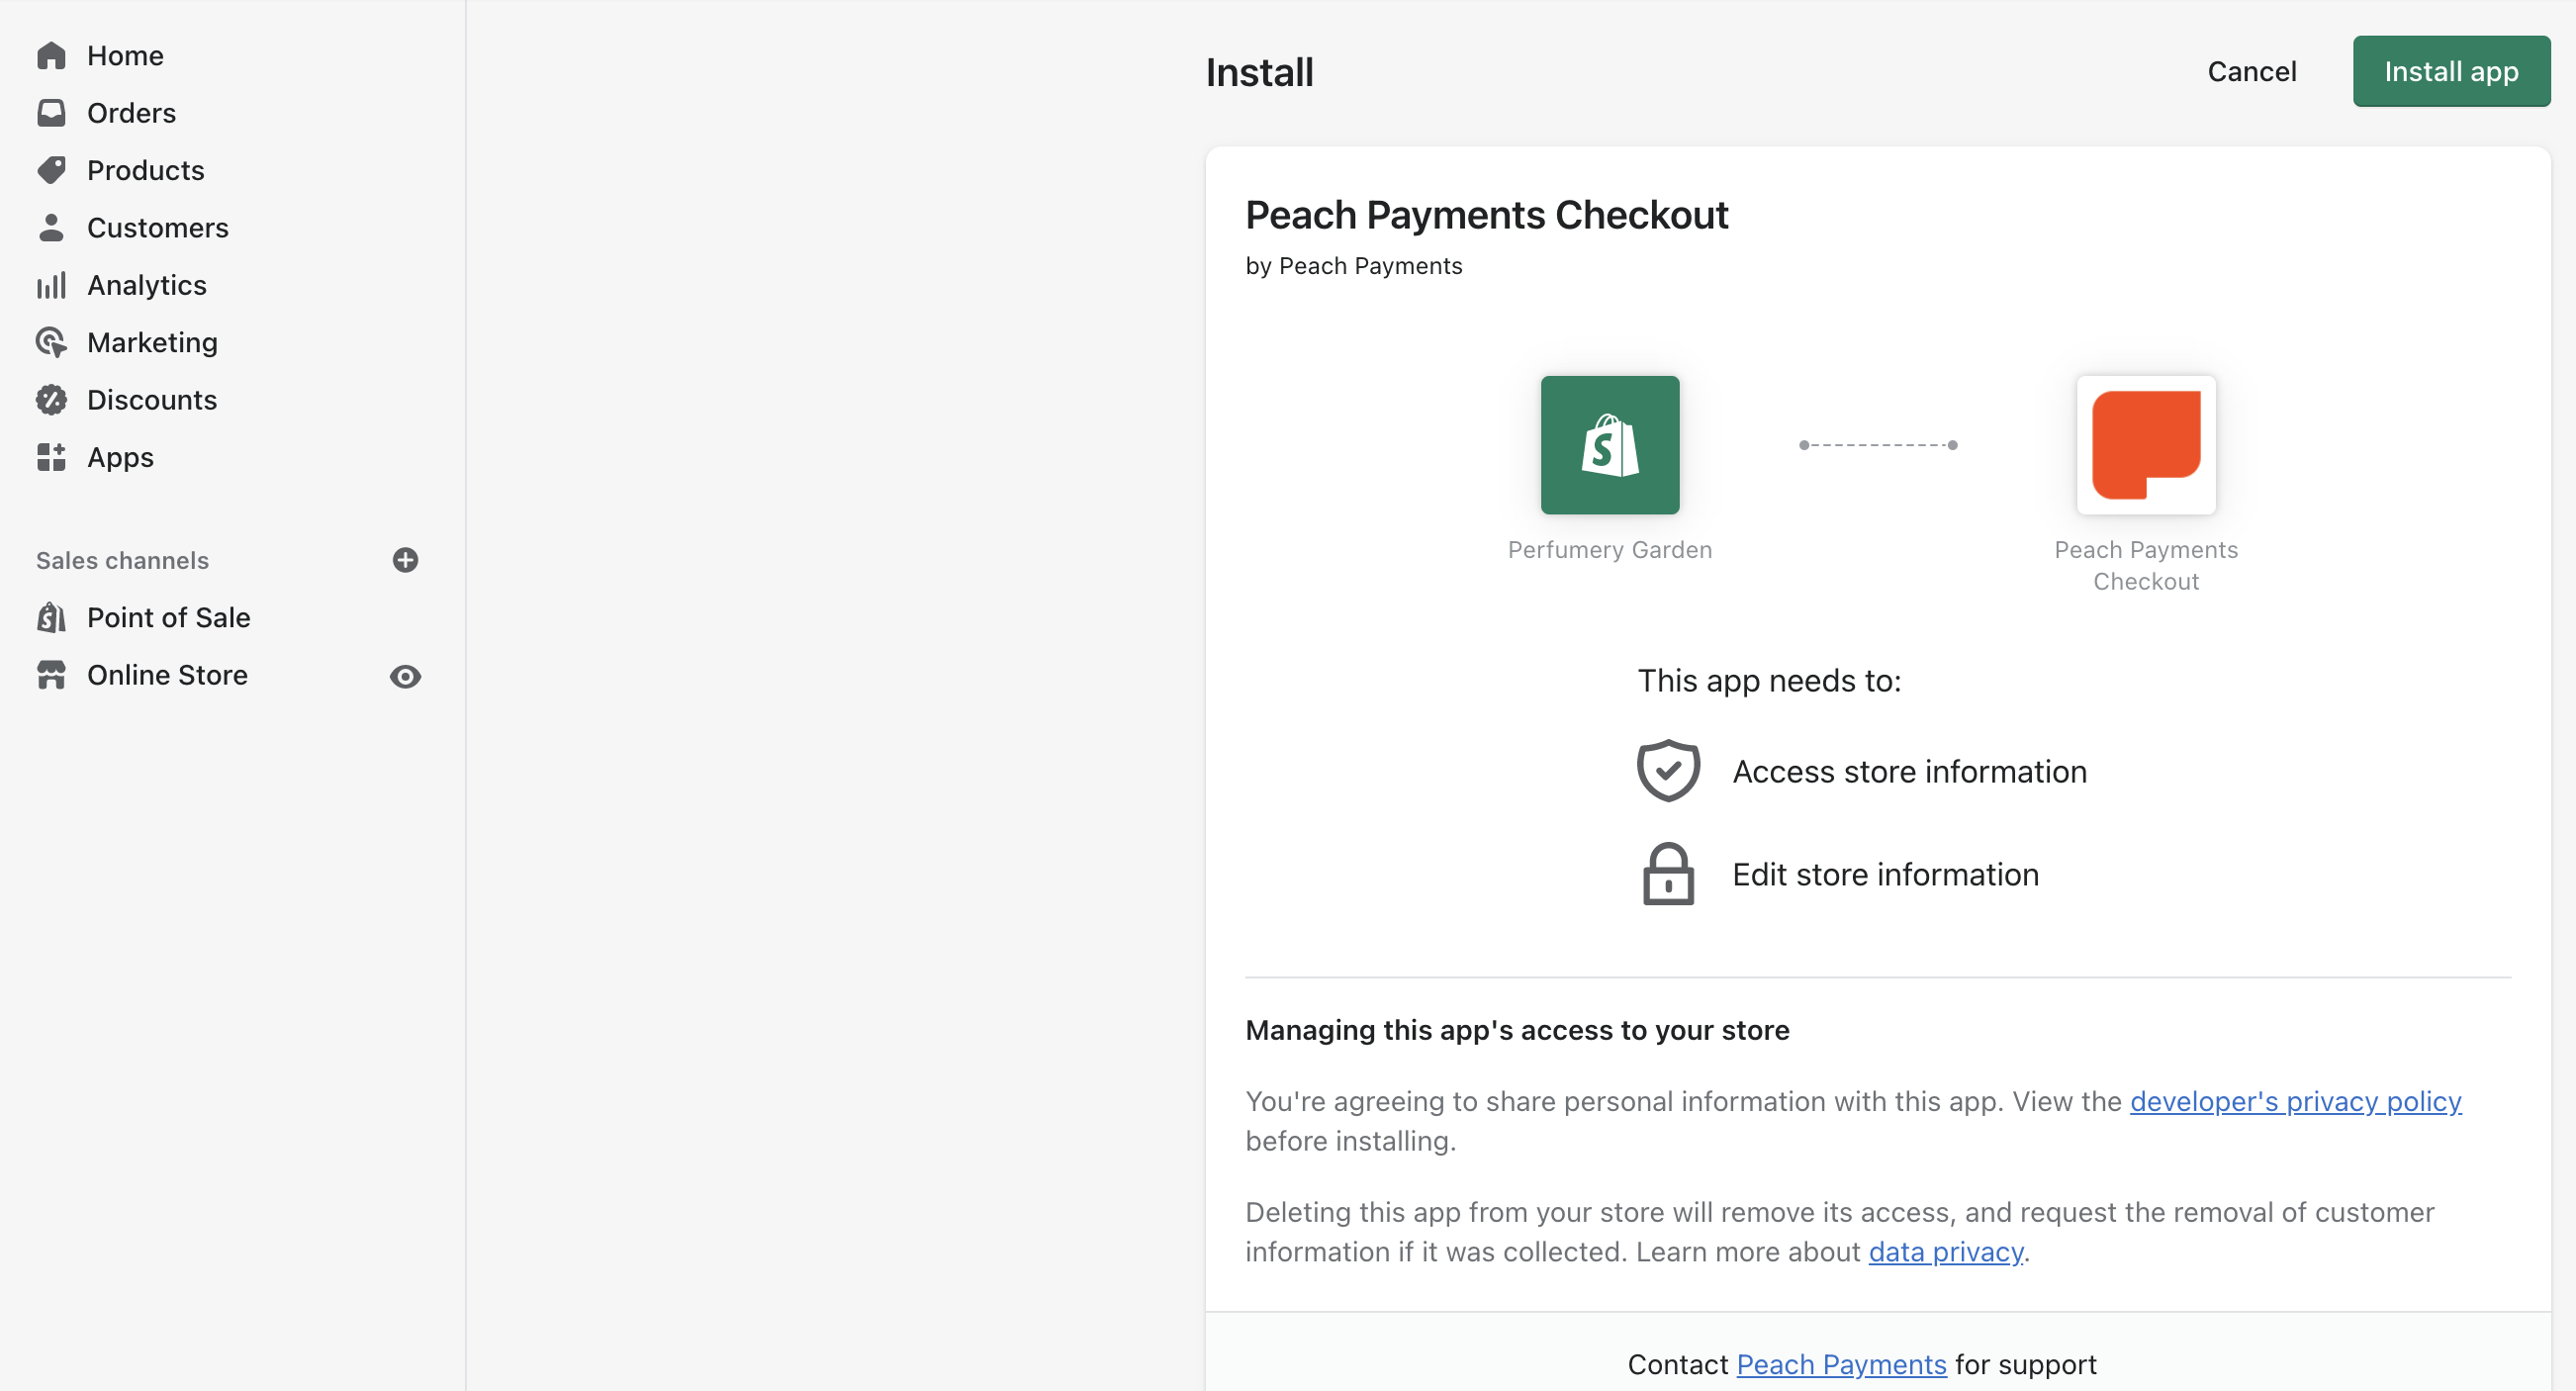 Install the Peach Payments app.